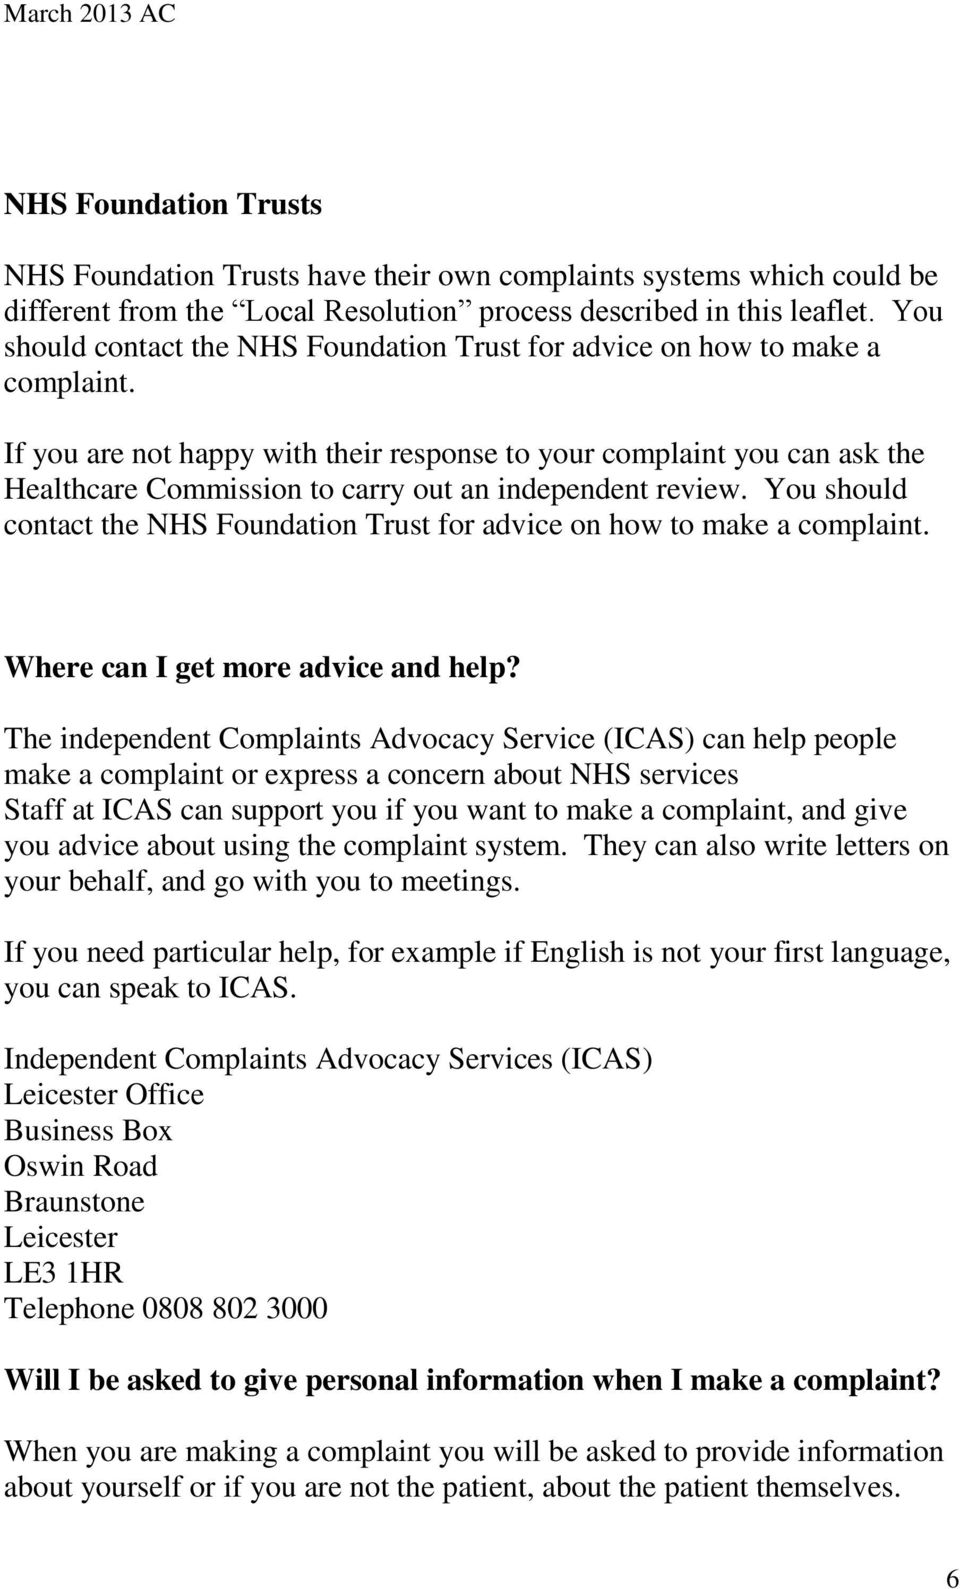 If you are not happy with their response to your complaint you can ask the Healthcare Commission to carry out an independent review.  Where can I get more advice and help?